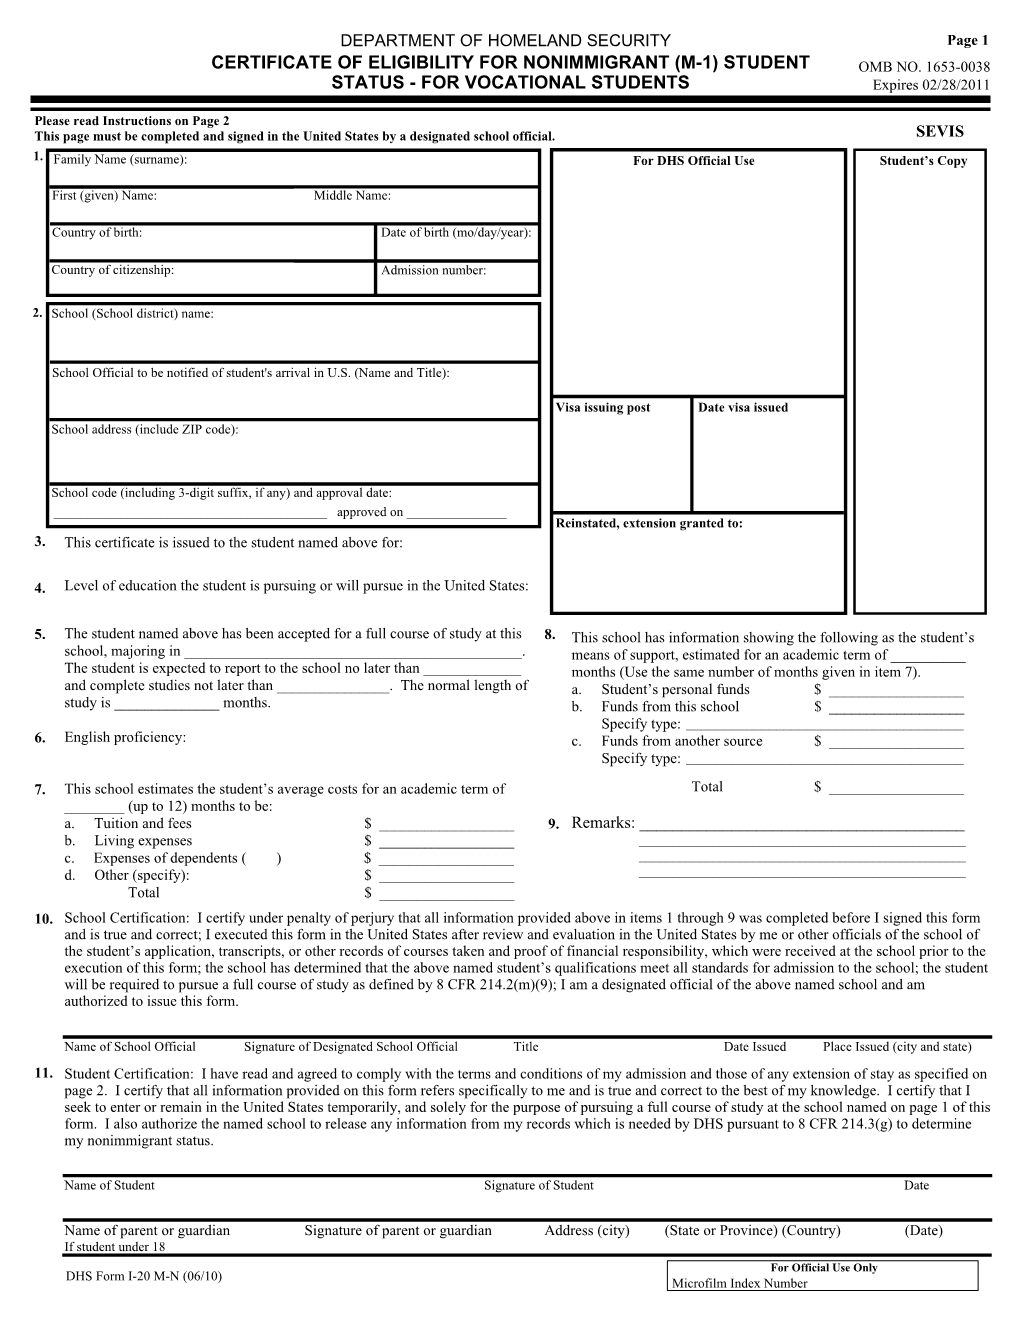 Certificate of Eligibility for Nonimmigrant (M-1) Student Omb No